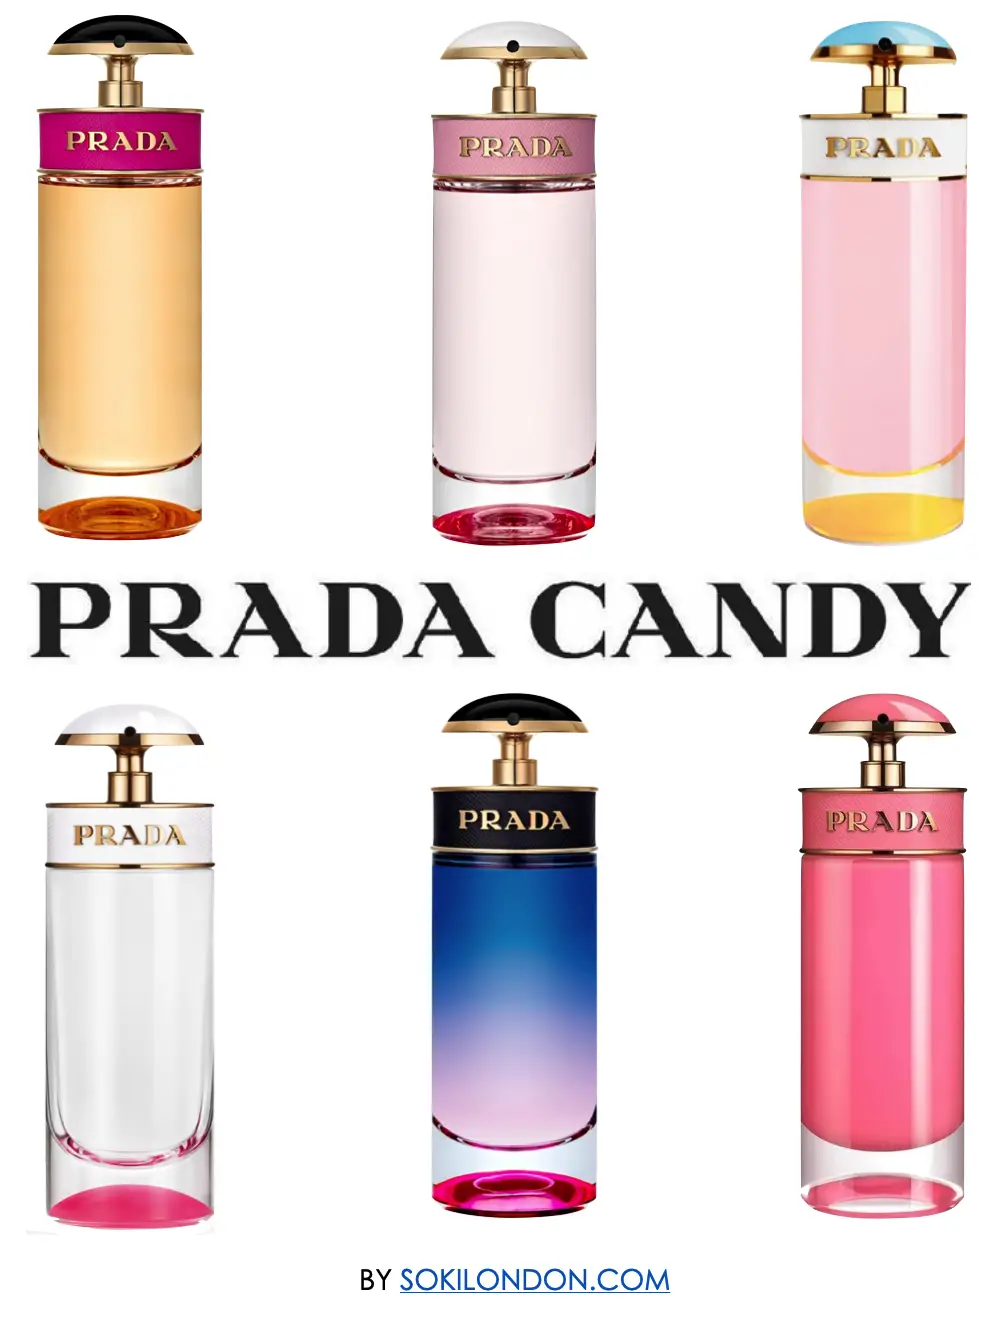 The Ultimate Guide To The Prada Candy Perfumes | Soki London